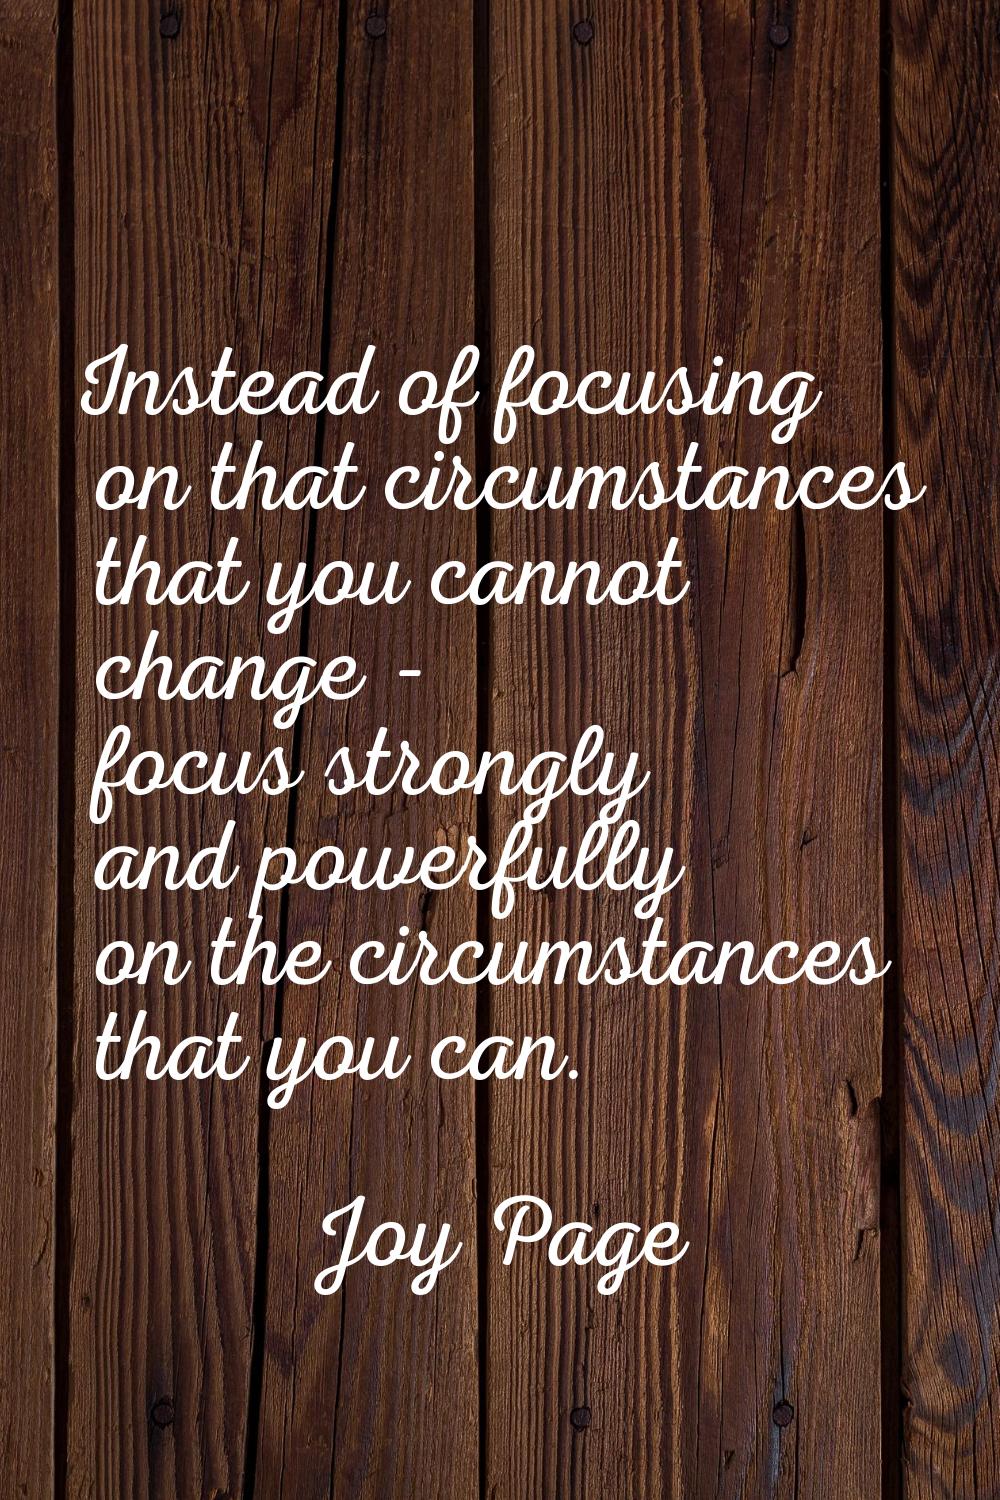 Instead of focusing on that circumstances that you cannot change - focus strongly and powerfully on